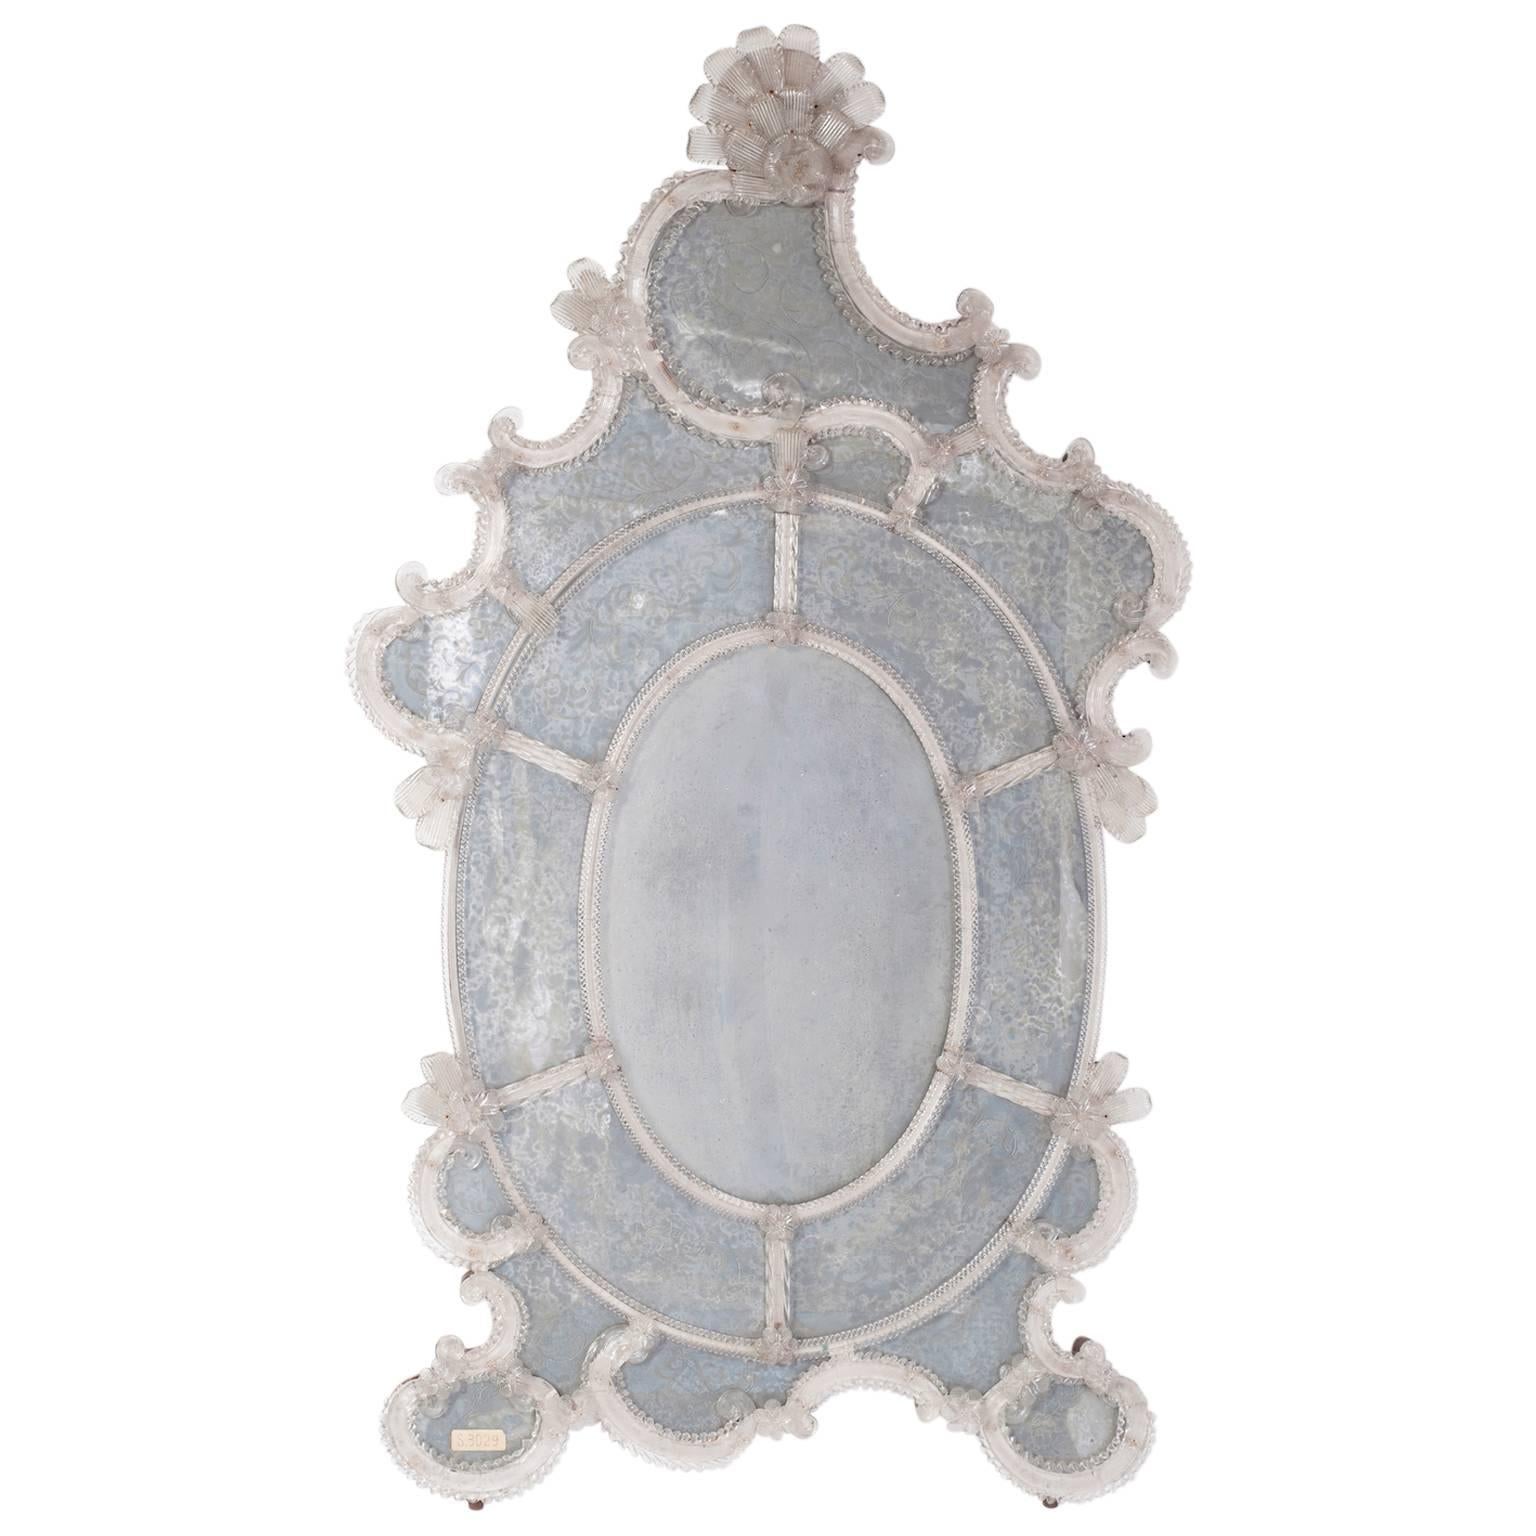 Italian Murano Glass Mirror 19th Century Attributed to Pauly & Co. For Sale